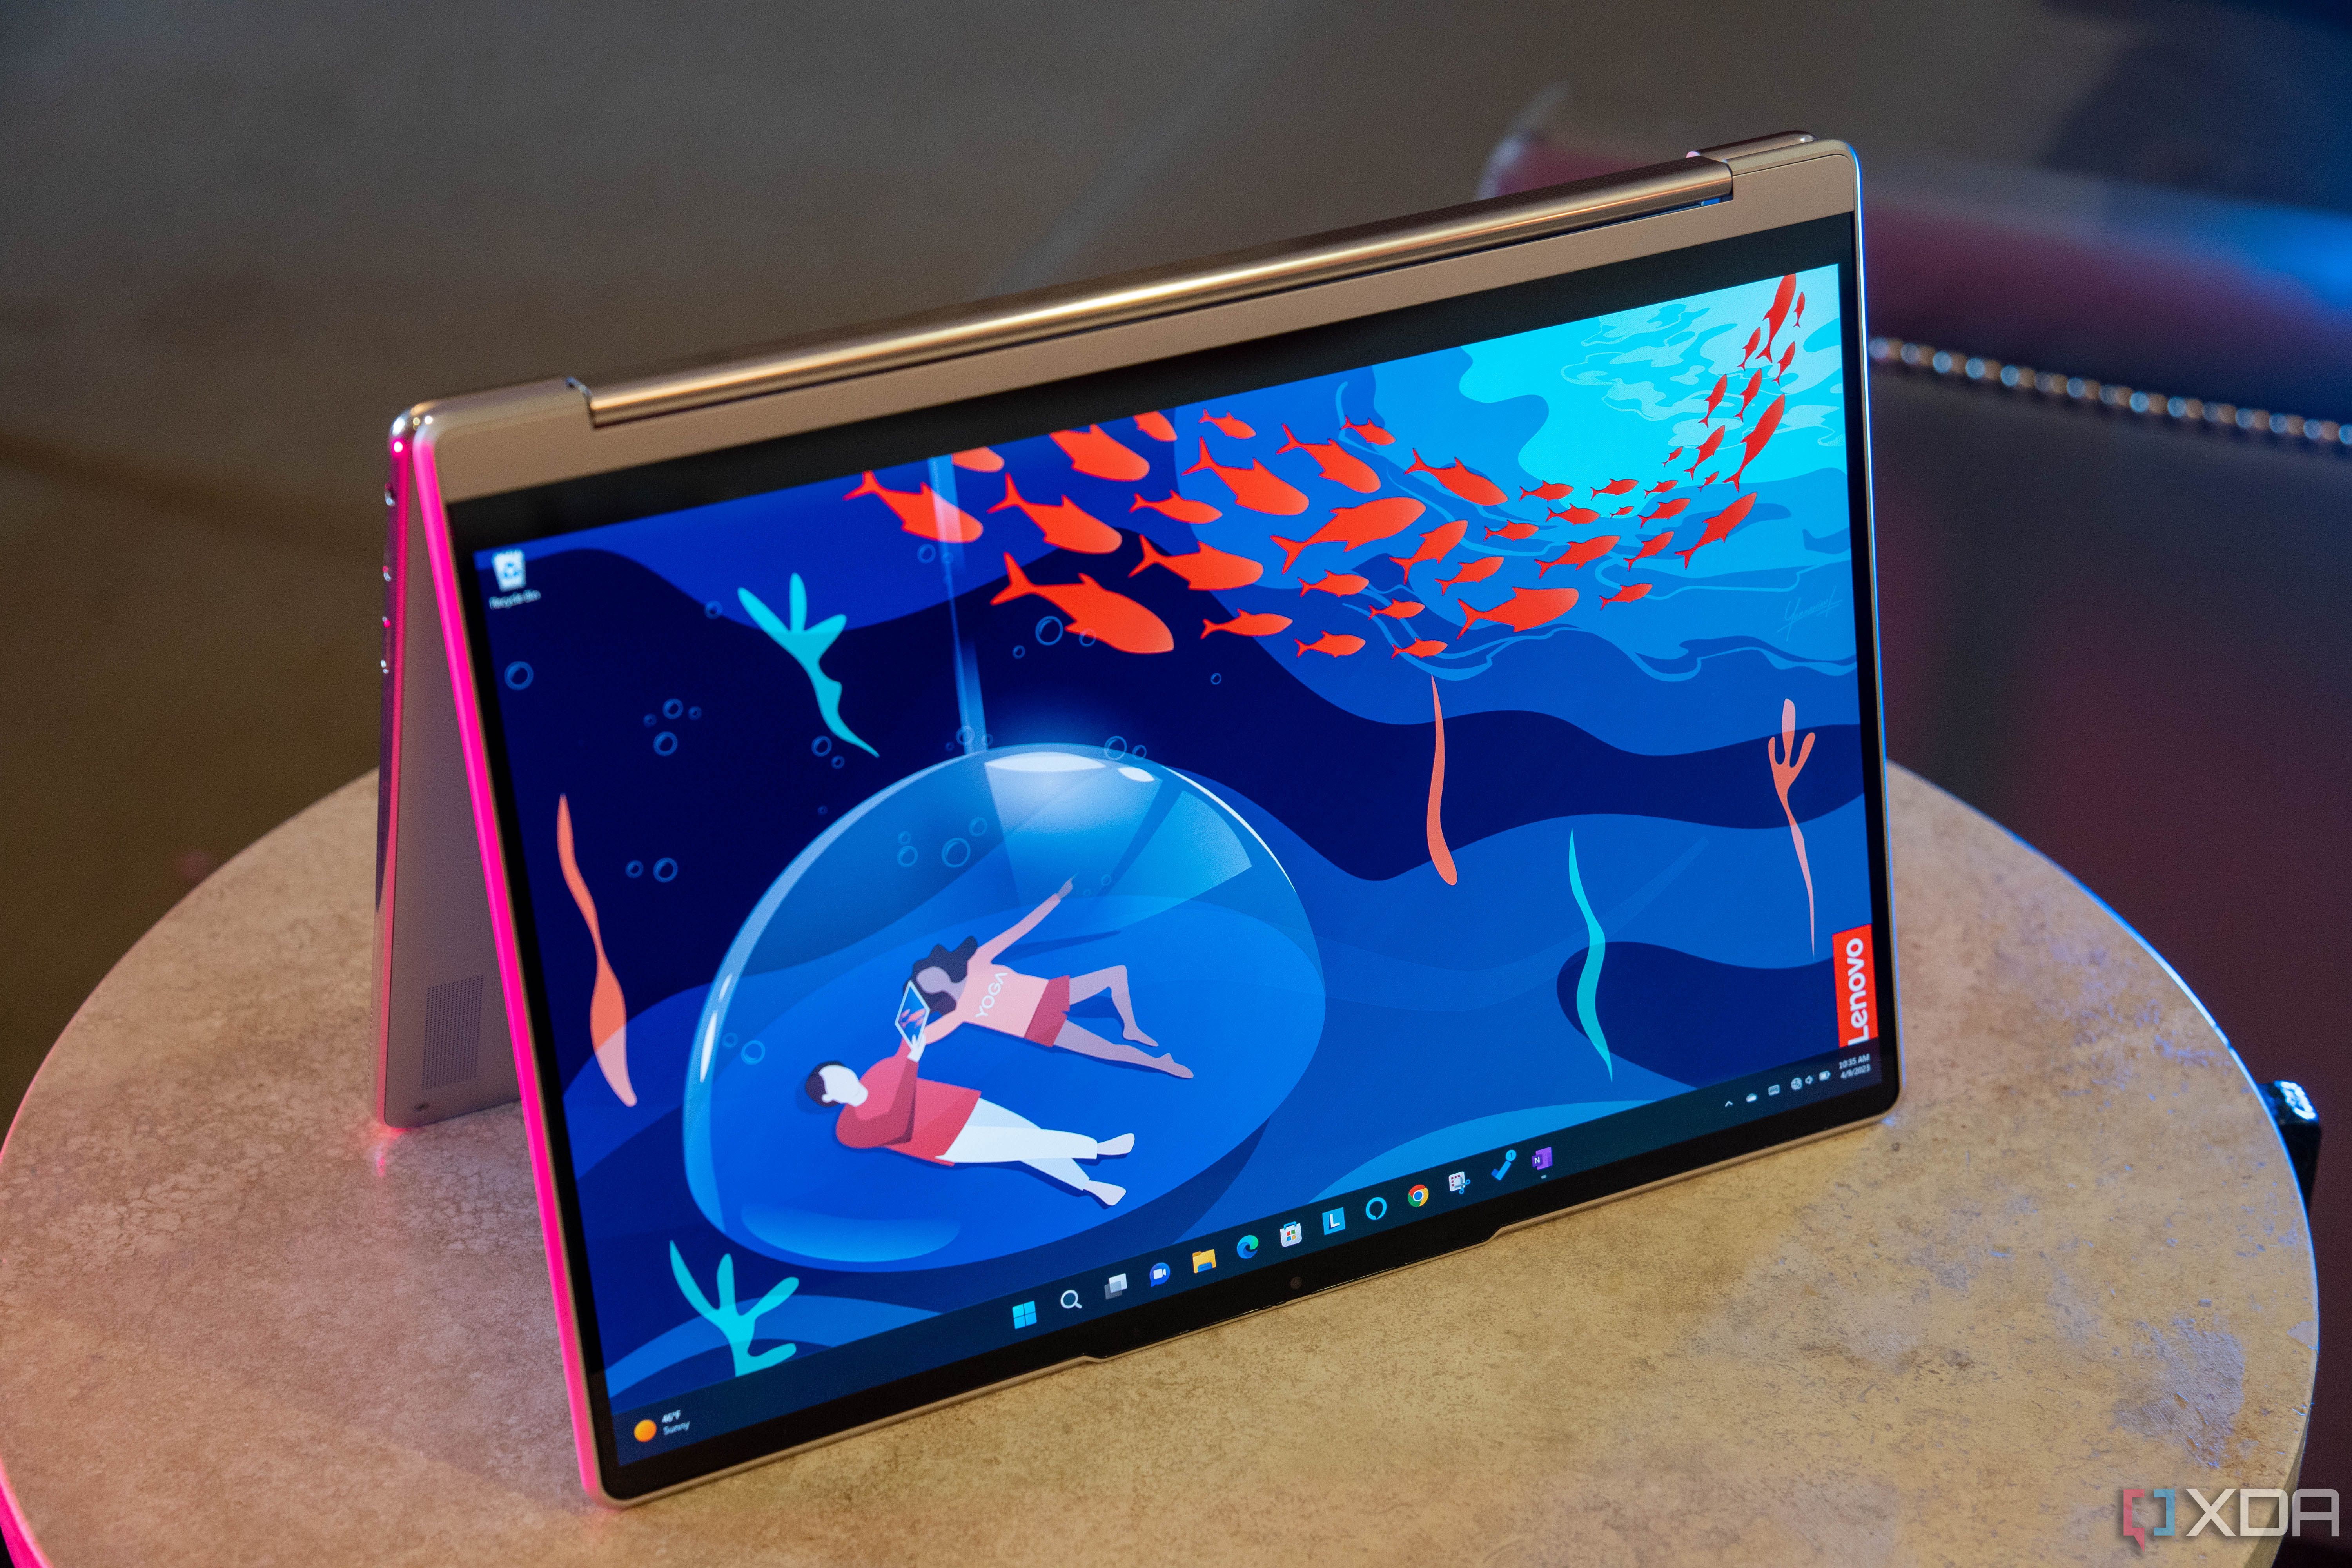 First look at Lenovo Yoga Pro 9i (Gen 8): video and images